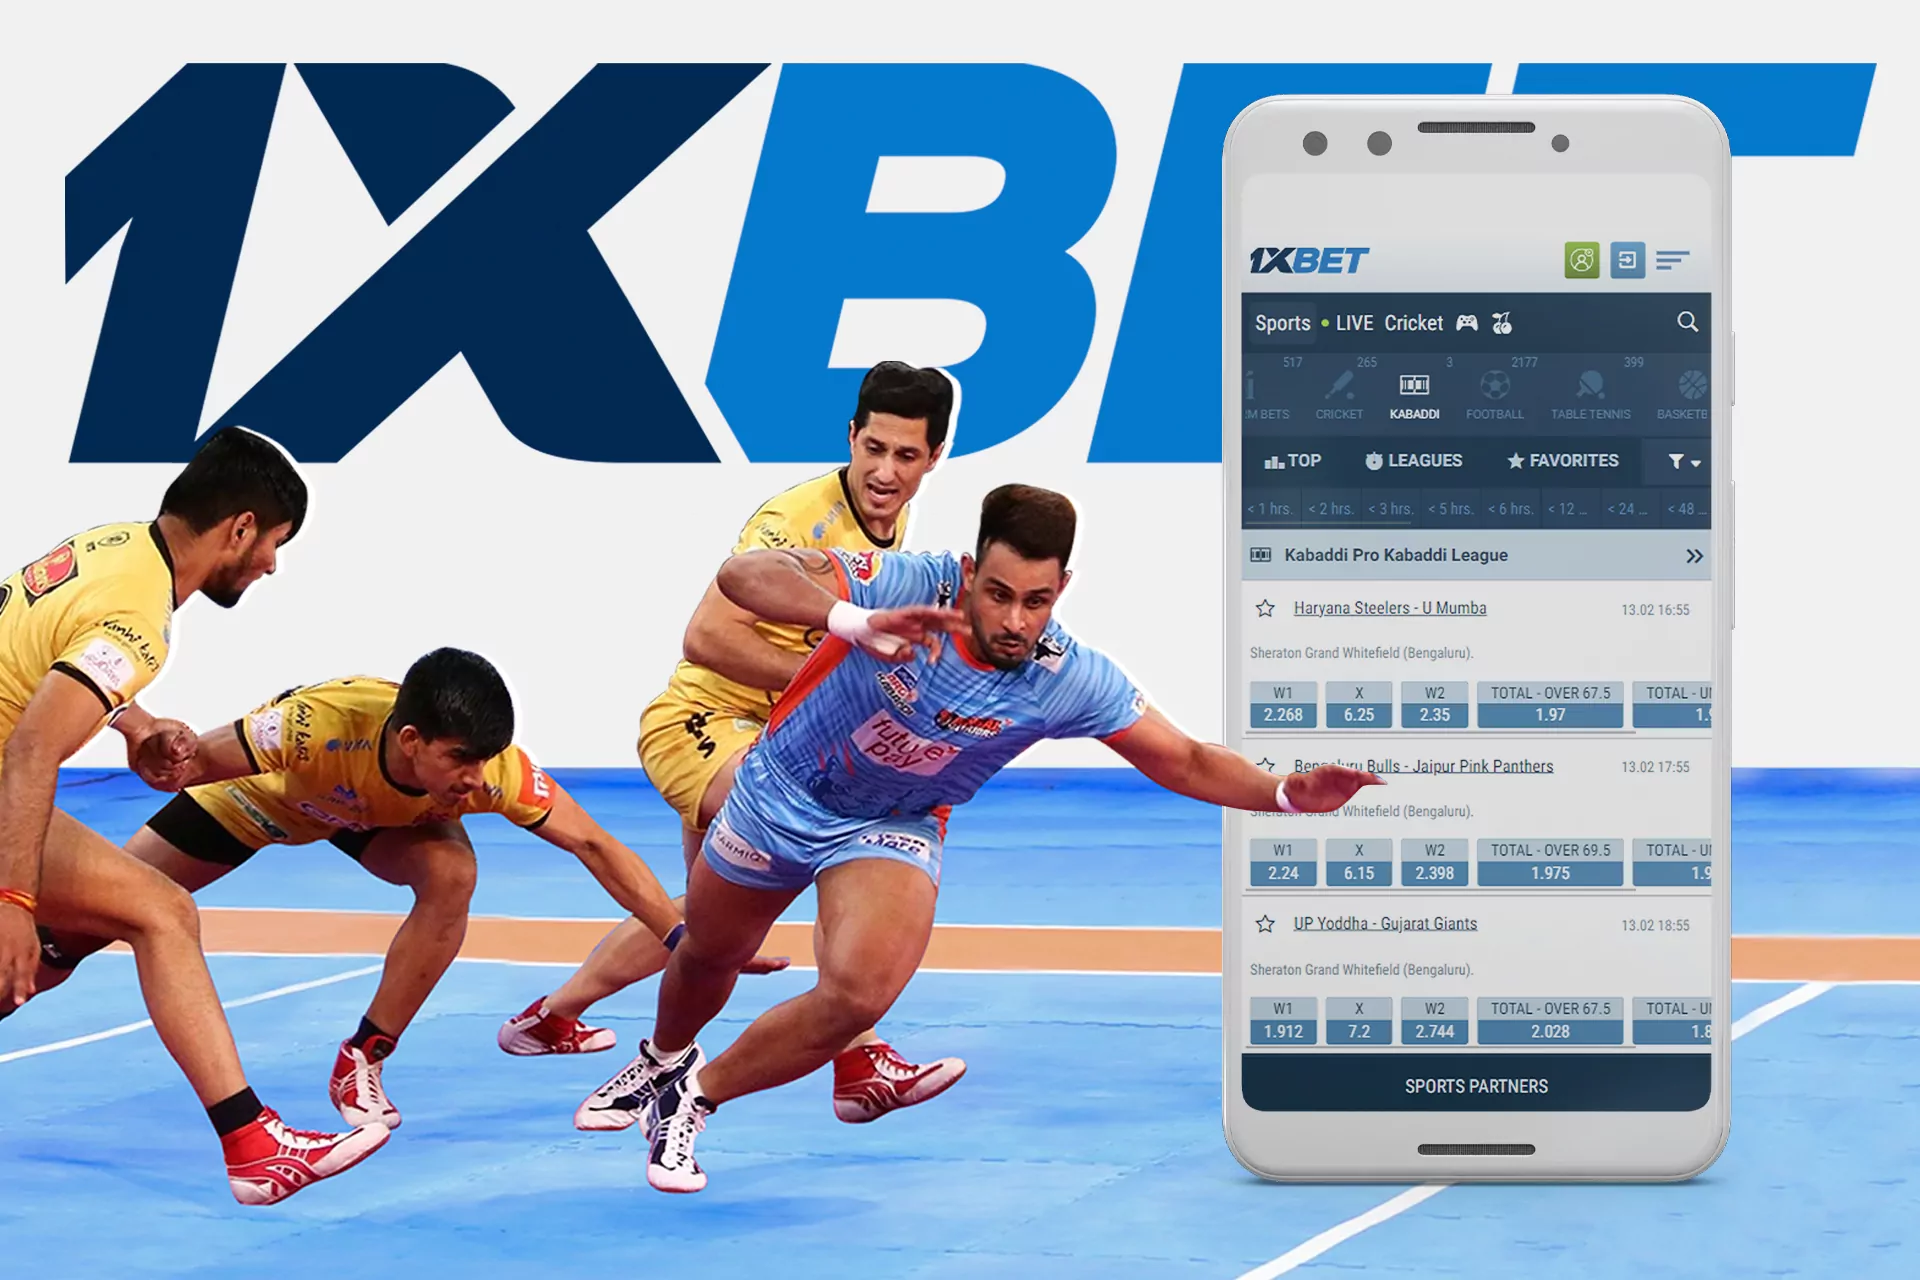 To place bets with the help of a smartphone, you should download and install the 1xBet app.